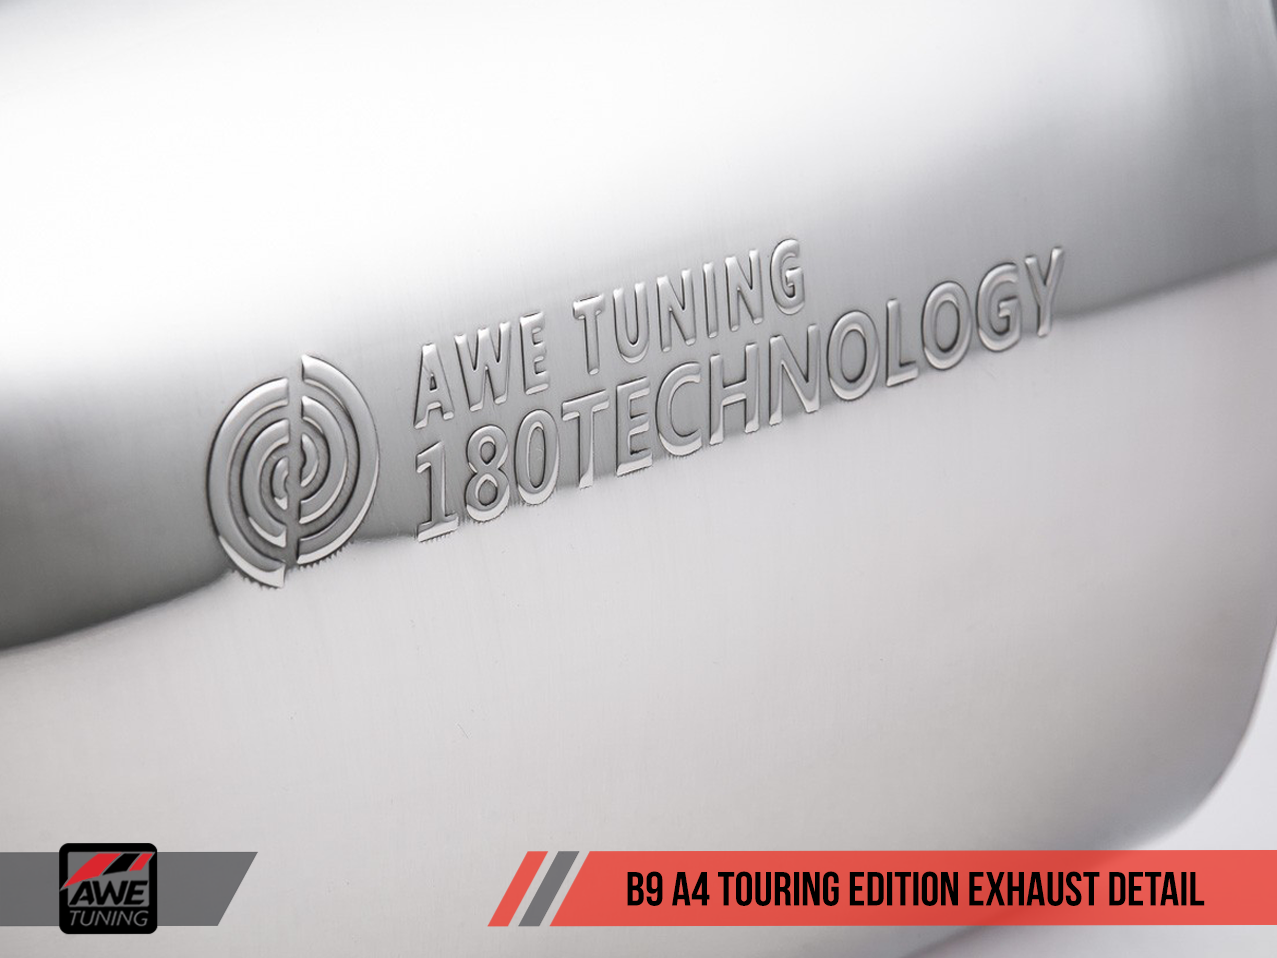 AWE Touring Edition Exhaust for B9 A4, Dual Outlet - Diamond Black Tips (includes DP)